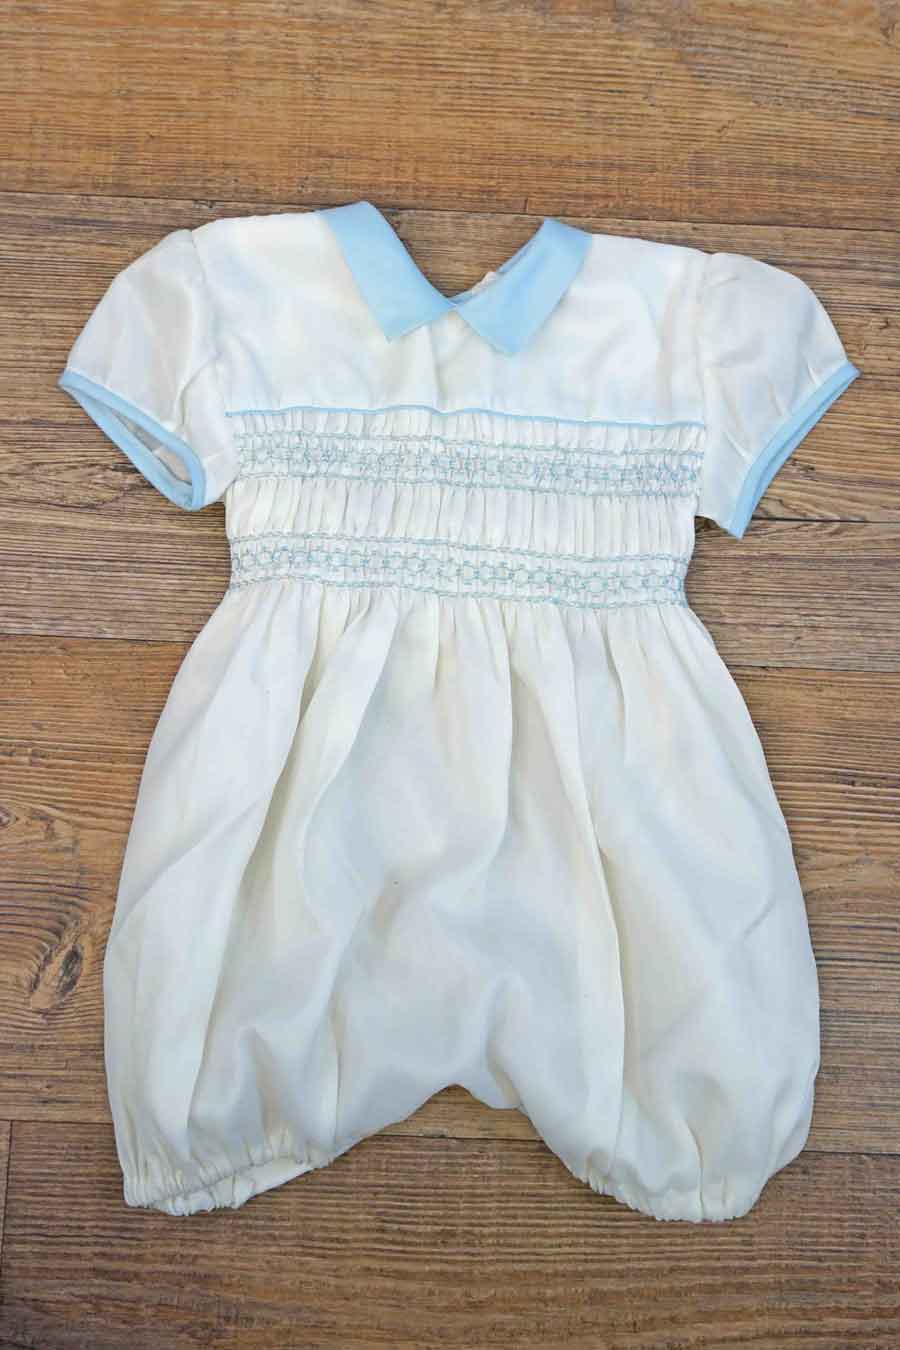 vintage 1950s boys baptism romper outfit all in one